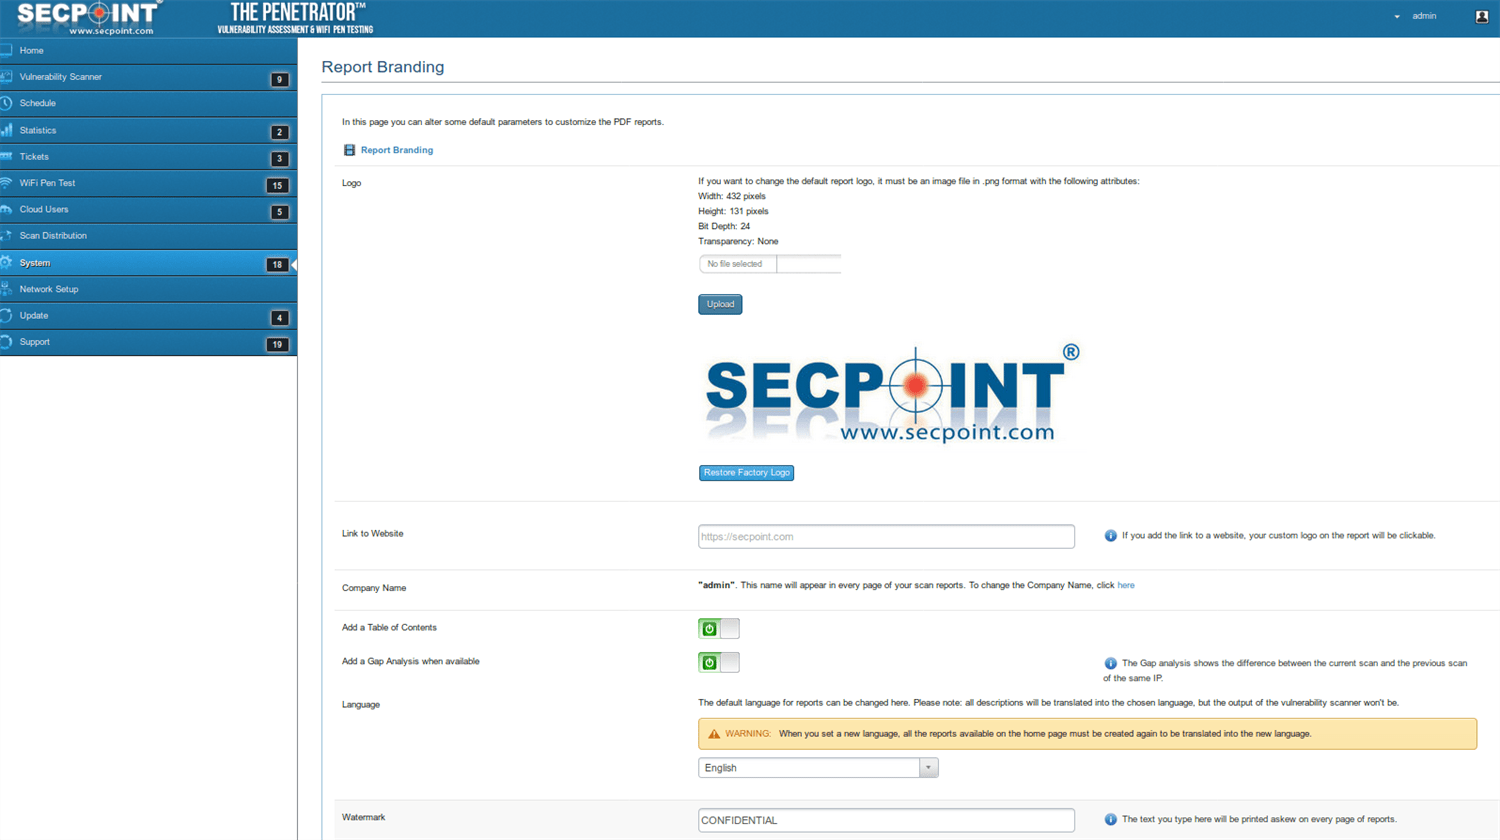 SecPoint Penetrator S9 - 2 IP Concurrent Scan License Security Assessment (1 Year License) - SecPoint